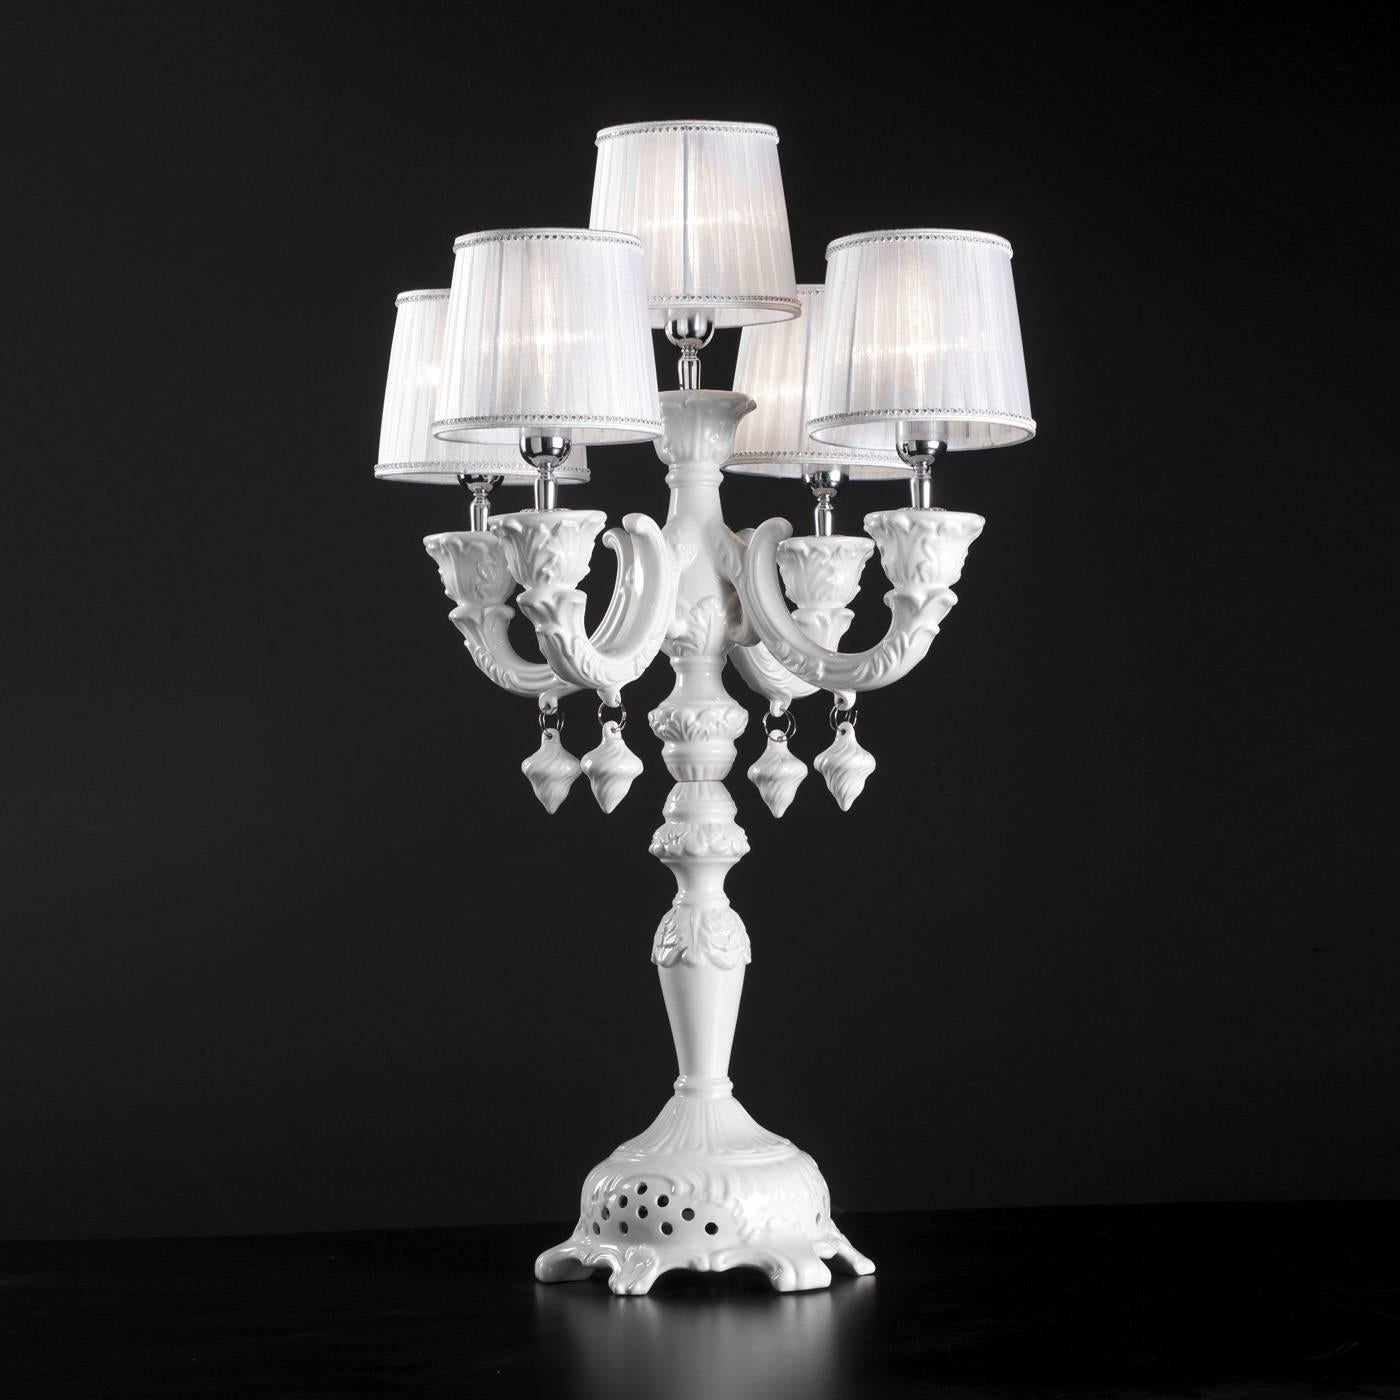 This exquisite lamp is ideal to be placed on large tables beautifully illuminating a room. The elegant shapes and perfect proportions make this piece a luxurious and unique object. The decorative opaque white ceramic lamp, featuring a candelabra